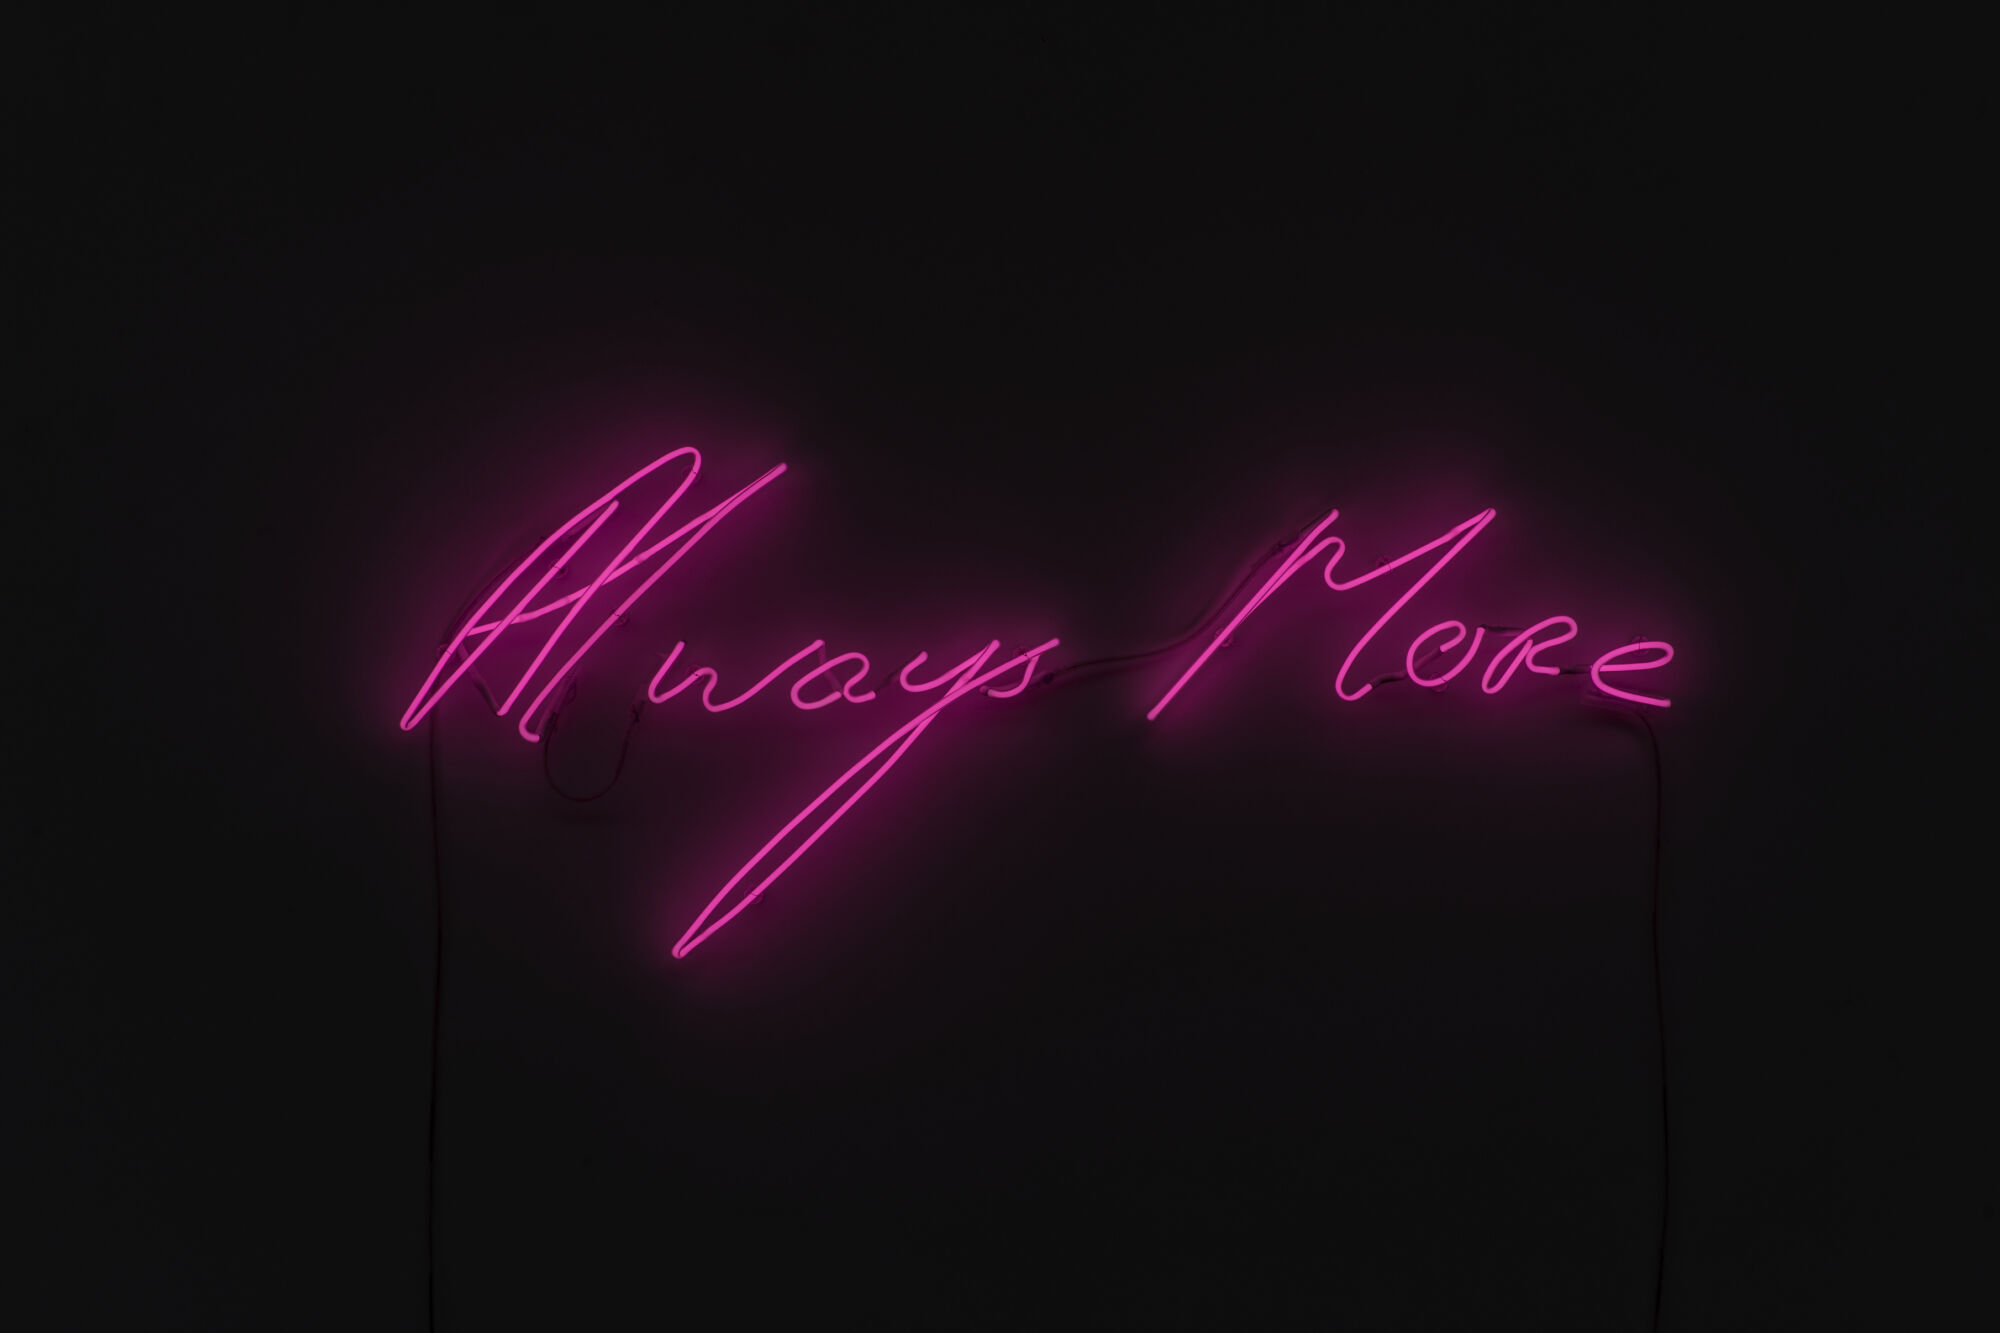 The Wick - Tracey Emin
Always More
2015
Neon
49.6 x 116.7 cm
Courtesy of the artist and White Cube
